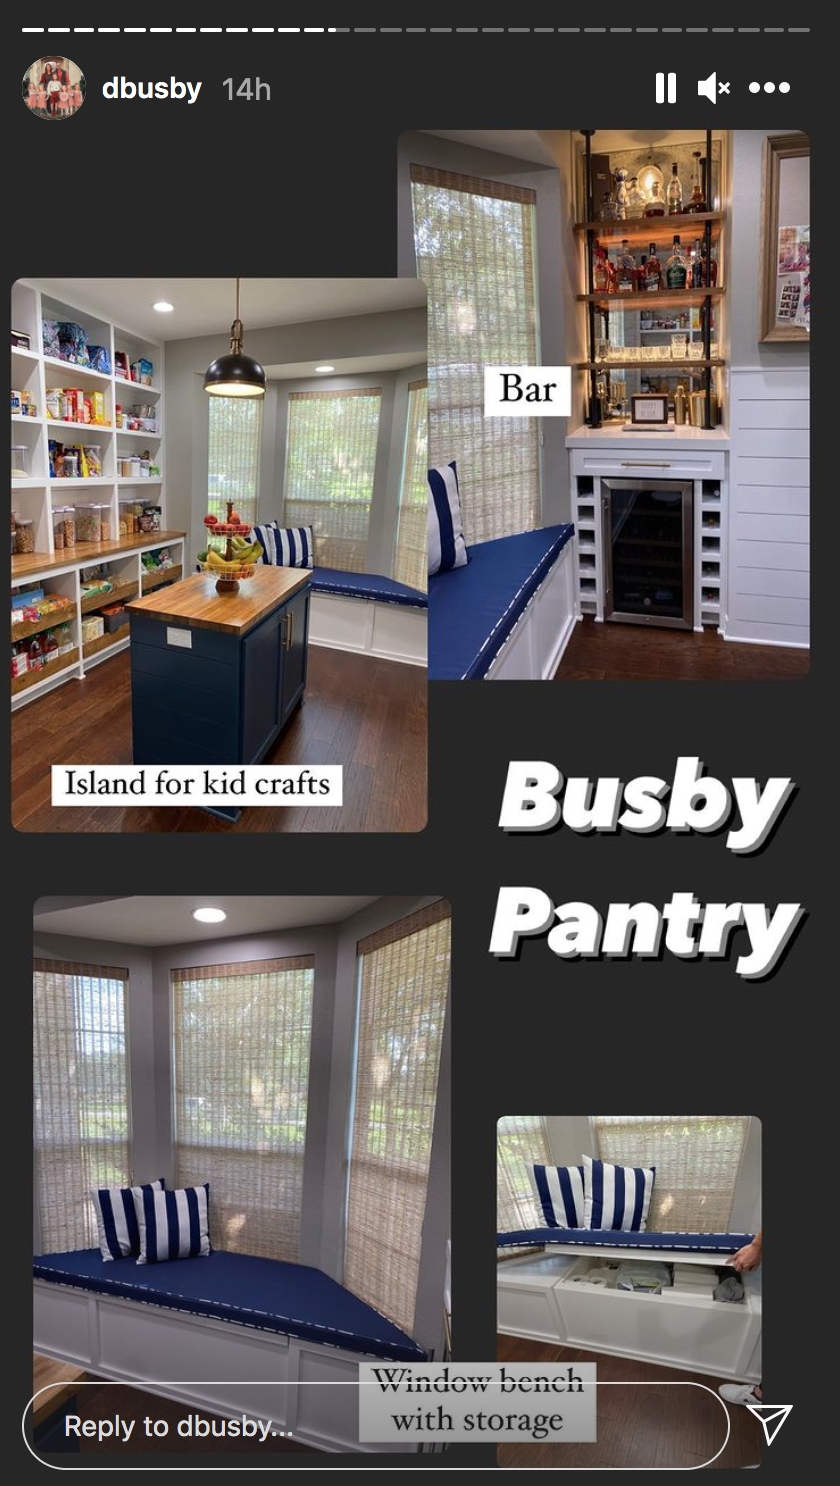 Busby Pantry